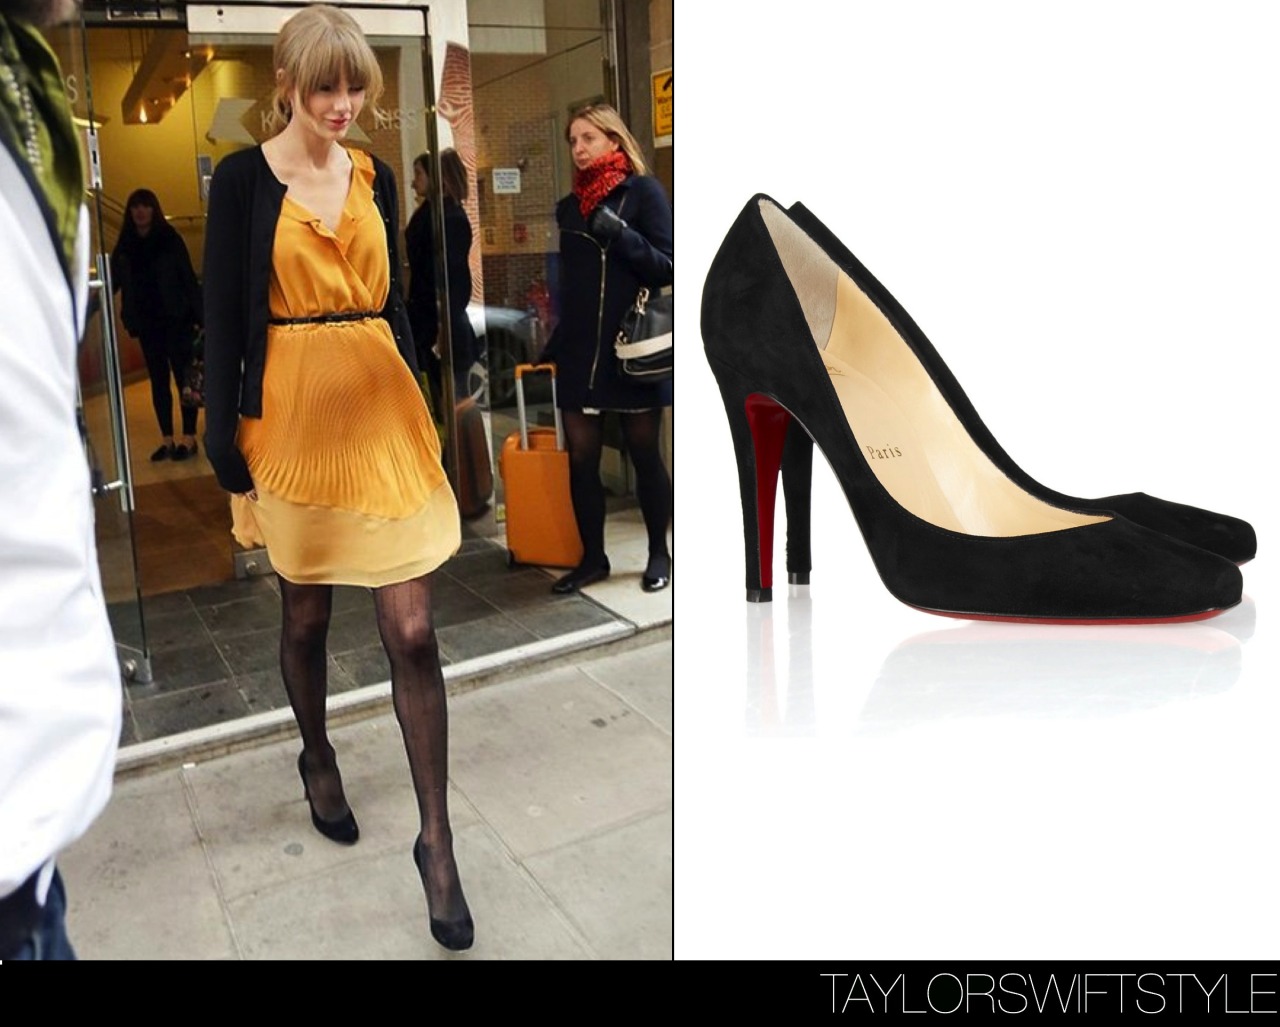 Leaving KISS 100 Radio studios | London, England | February 21, 2013Christian Louboutin &#8216;Particule Suede Pumps&#8217; - $742.35 (CAD)